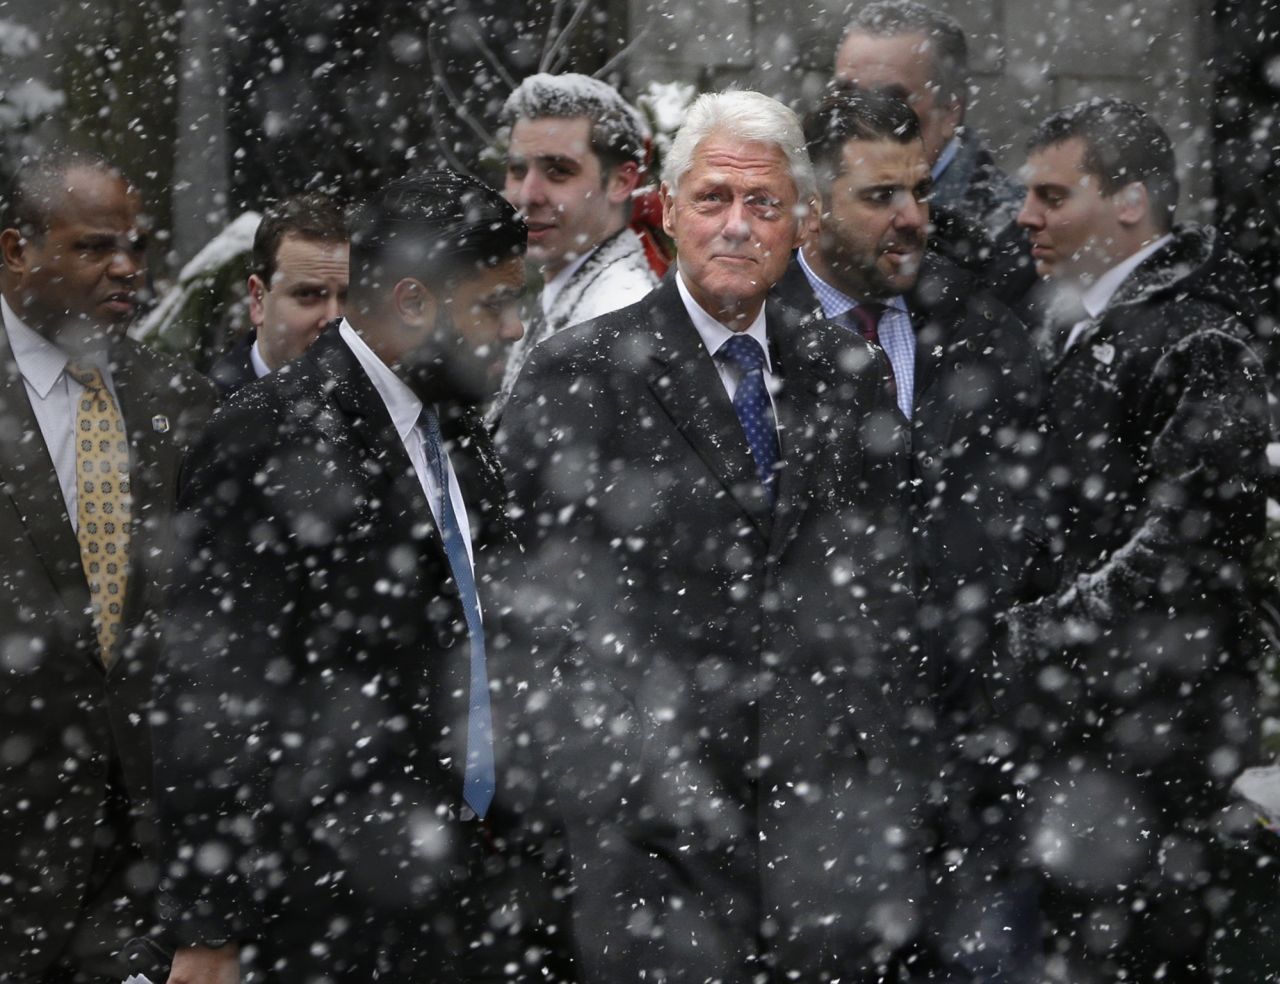 Former President Bill Clinton arrives for the funeral.